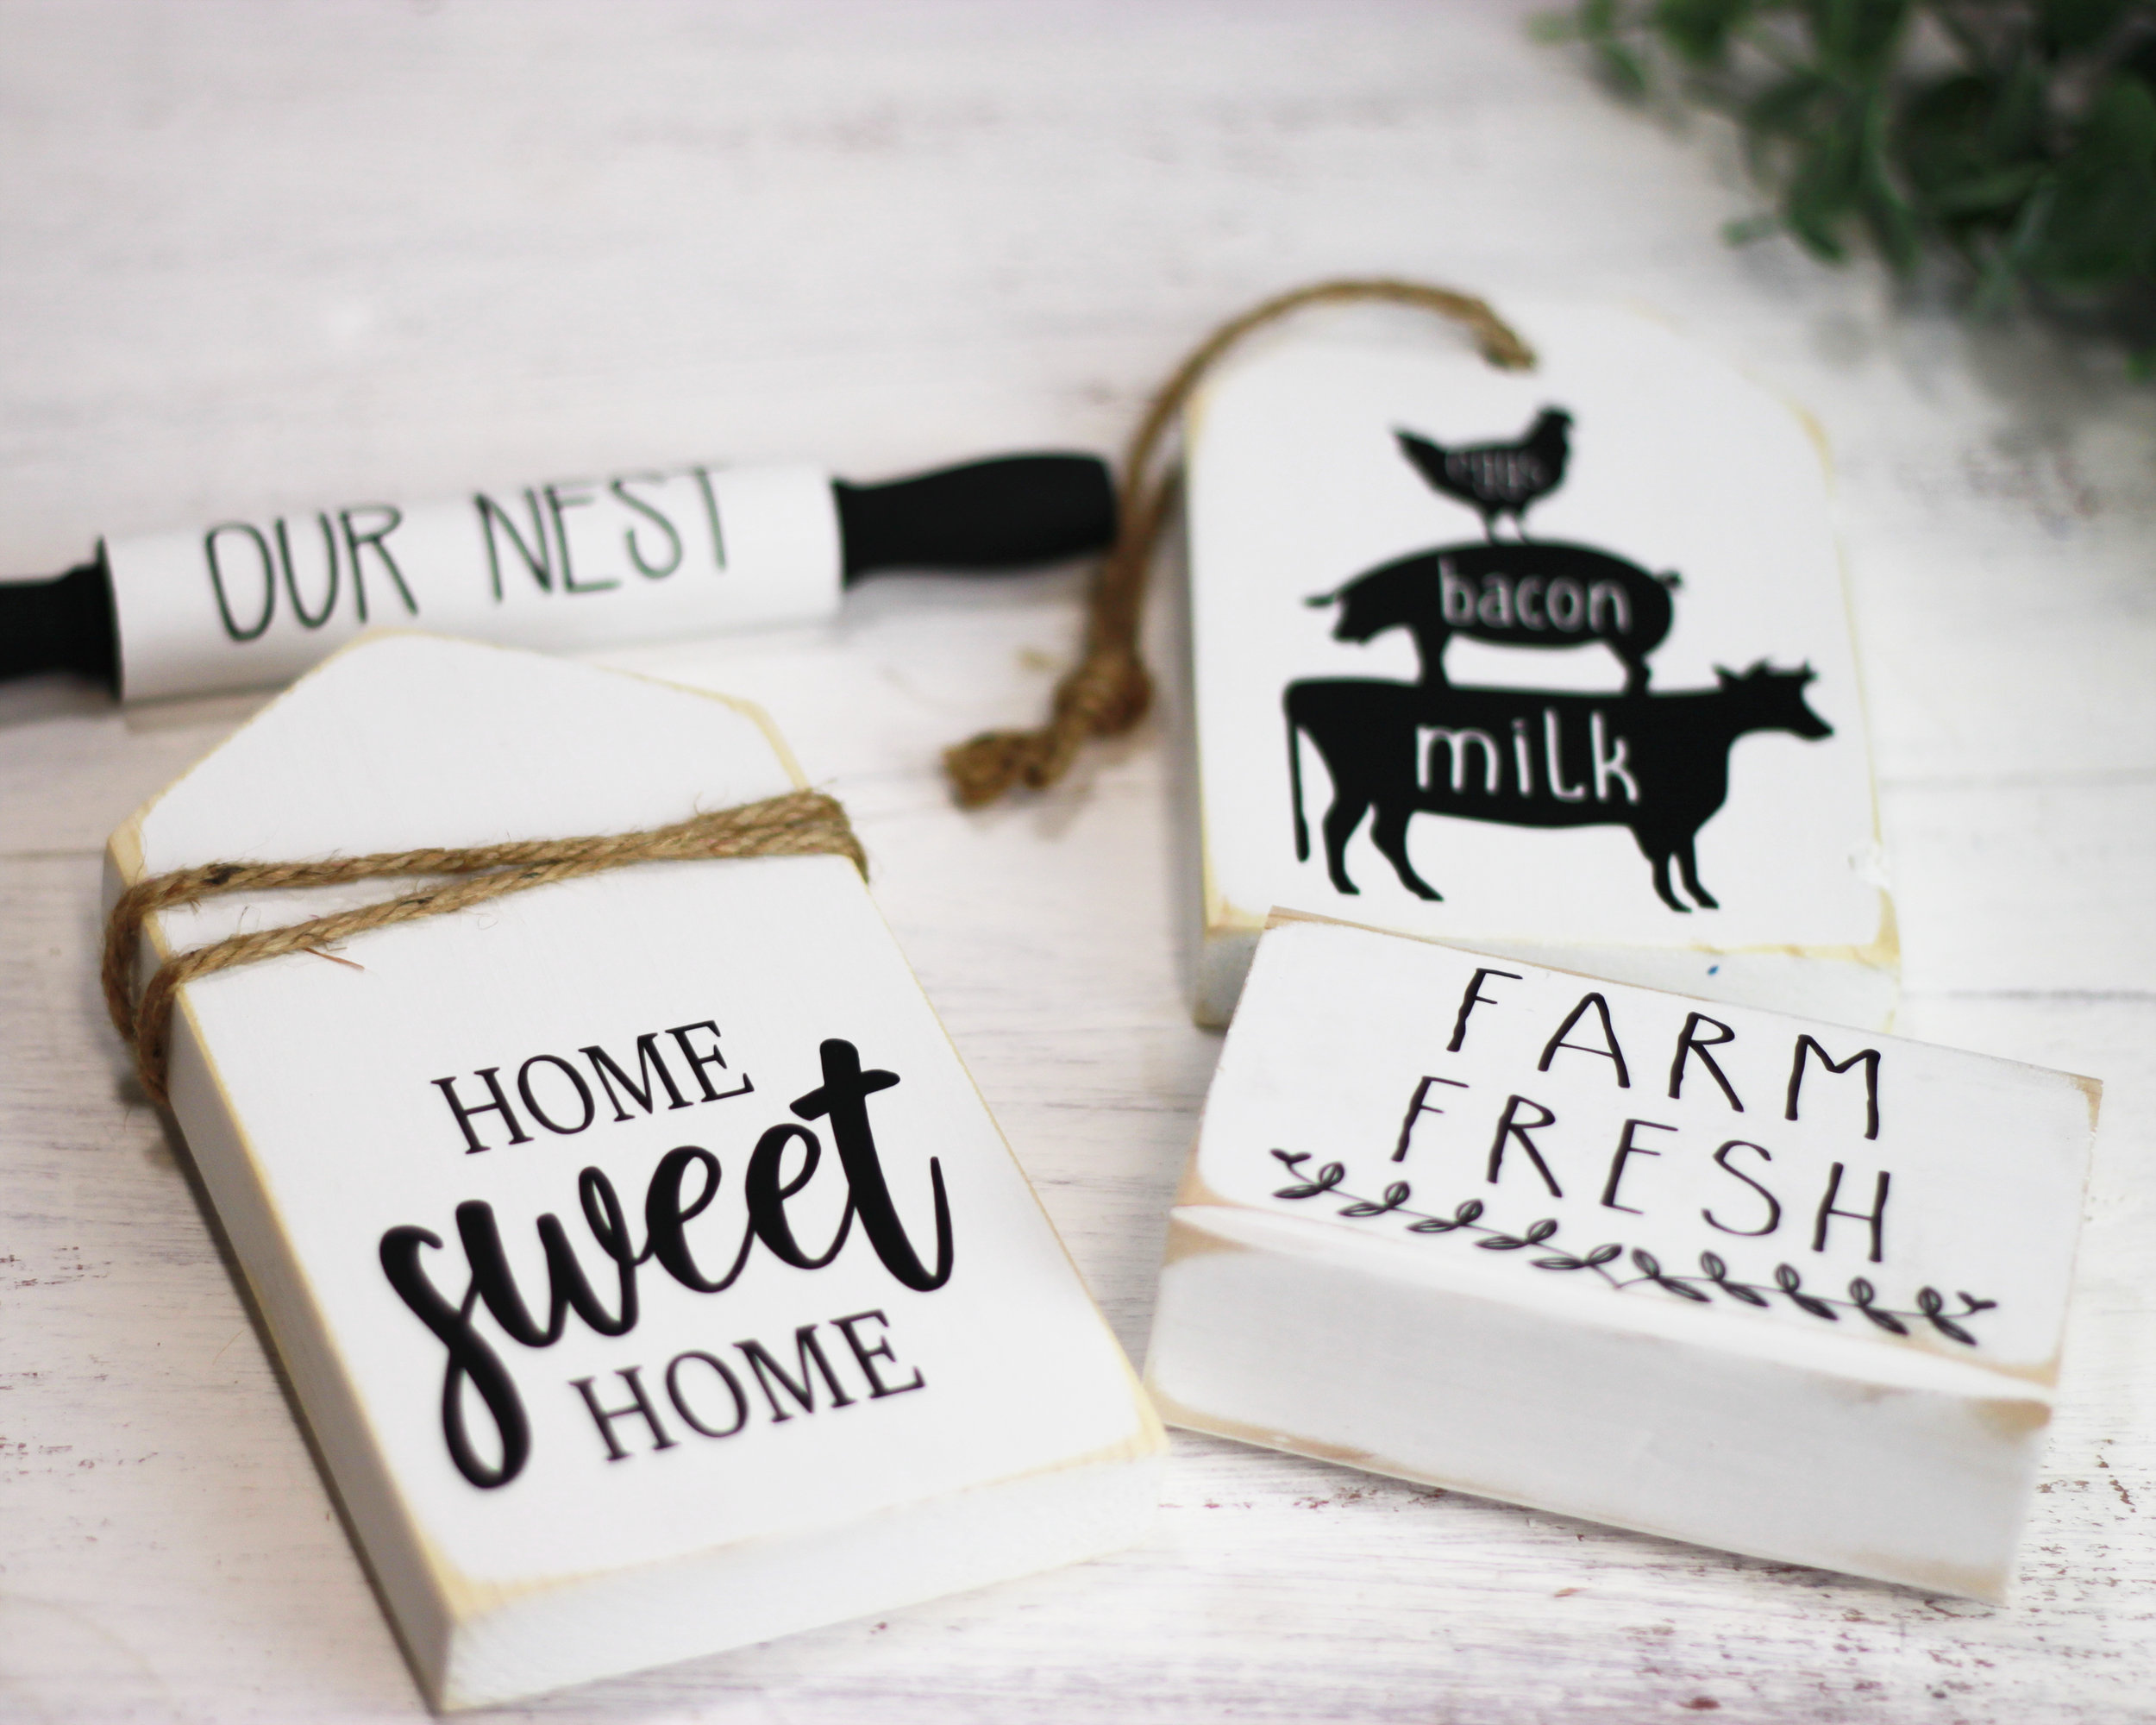 Tiered tray signs for rustic home decor. Classic style mini wood signs in white and black. Sign bundle comes with home sweet home, farm animal trio of chicken pig and cow on a rustic wood tag, mini rolling pin our nest, and farm fresh.